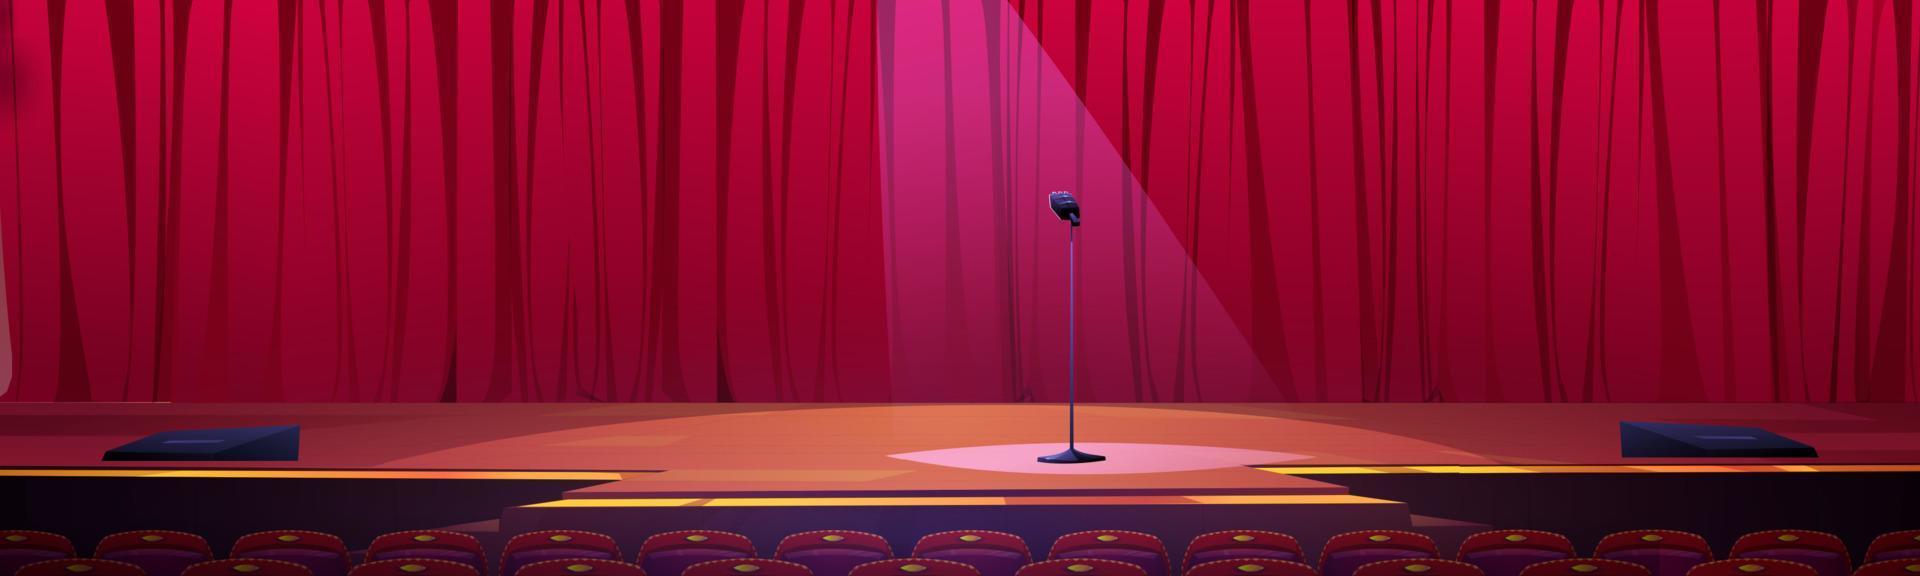 Stage with red curtains and microphone, podium vector